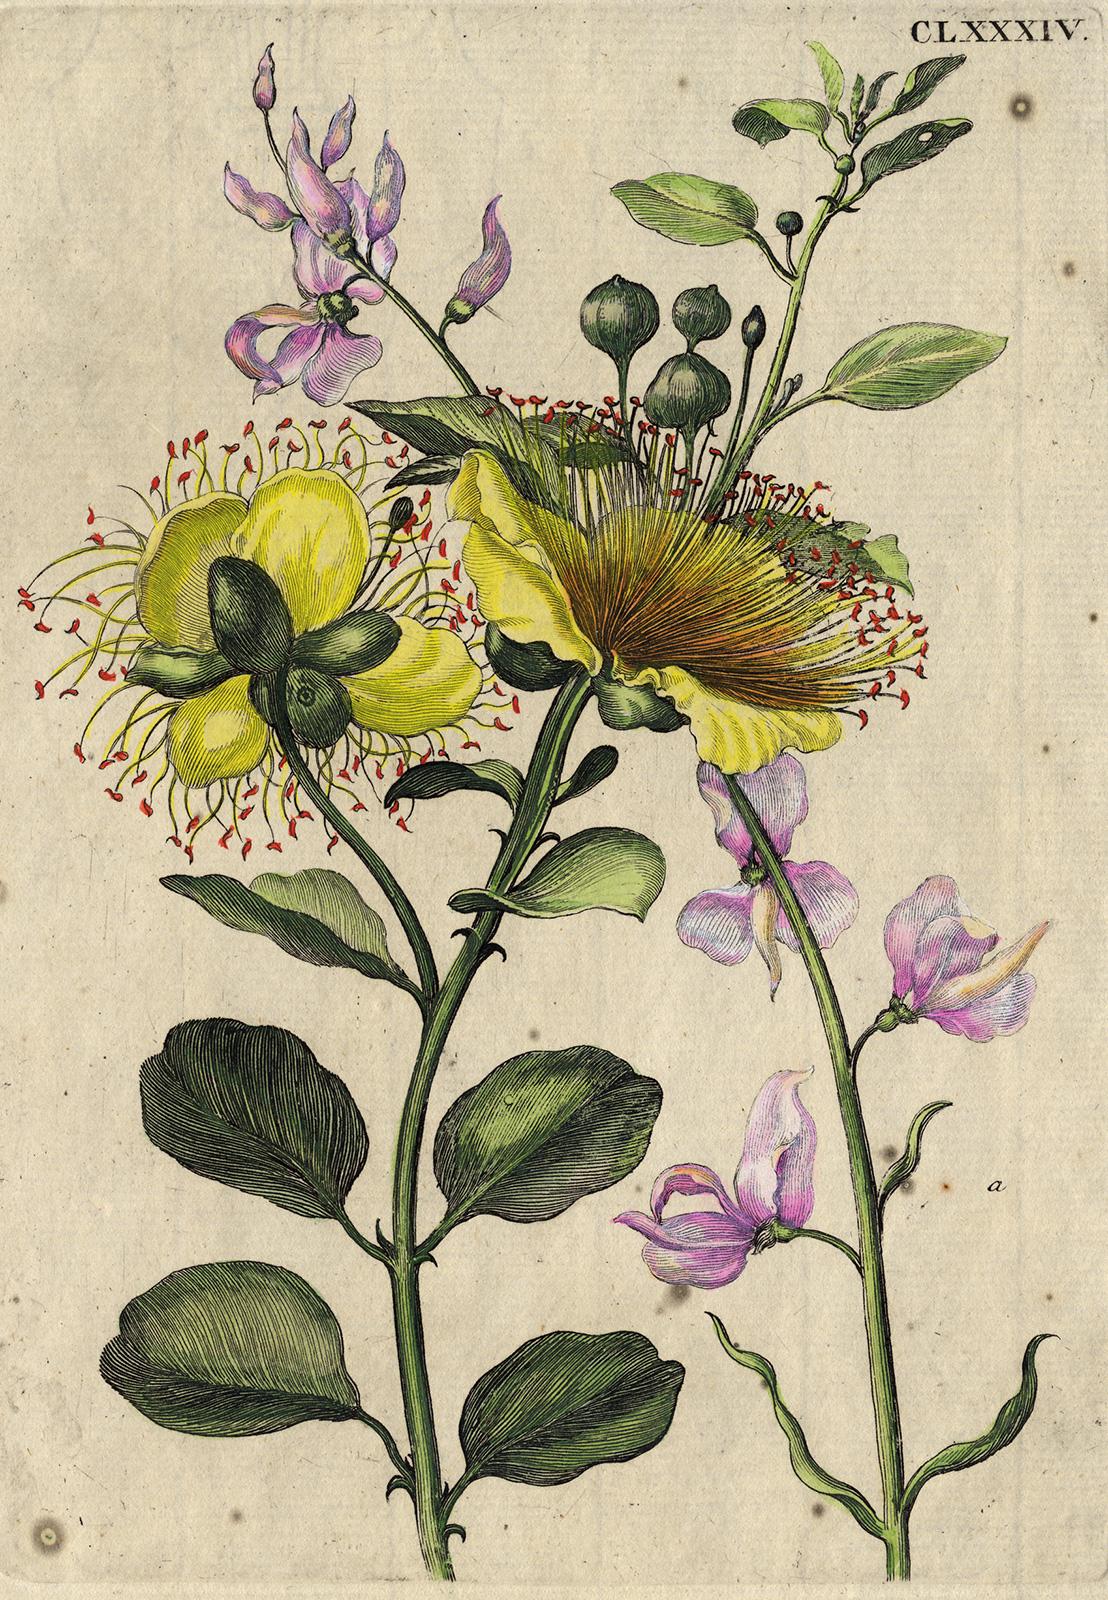 Flinders Rose with insects by Merian - Handcoloured engraving - 18th century - Print by Maria Sybilla Merian